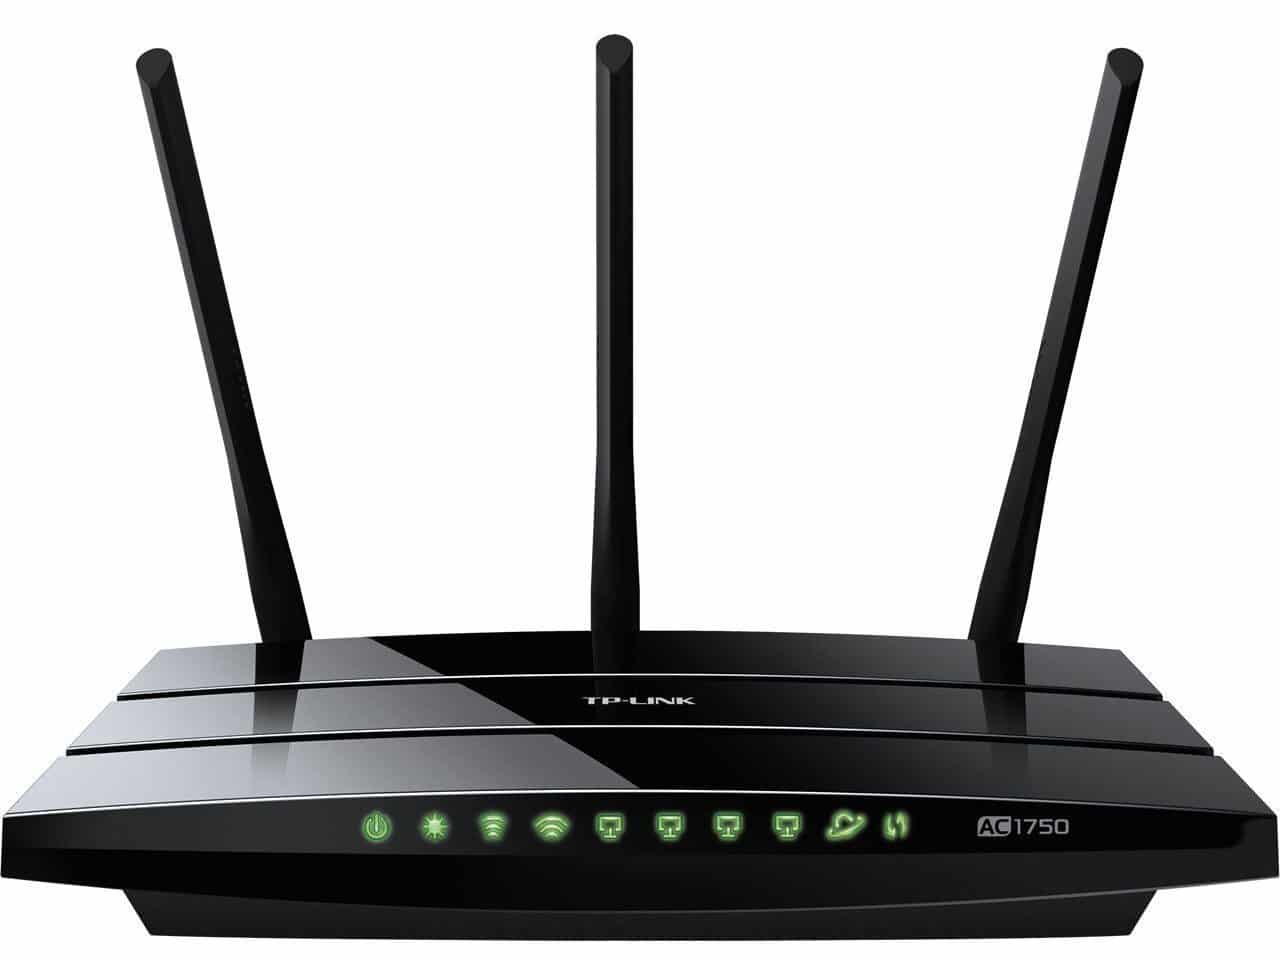 10 Best Wireless Router Reviews 2018 - Smart Routers for Gaming